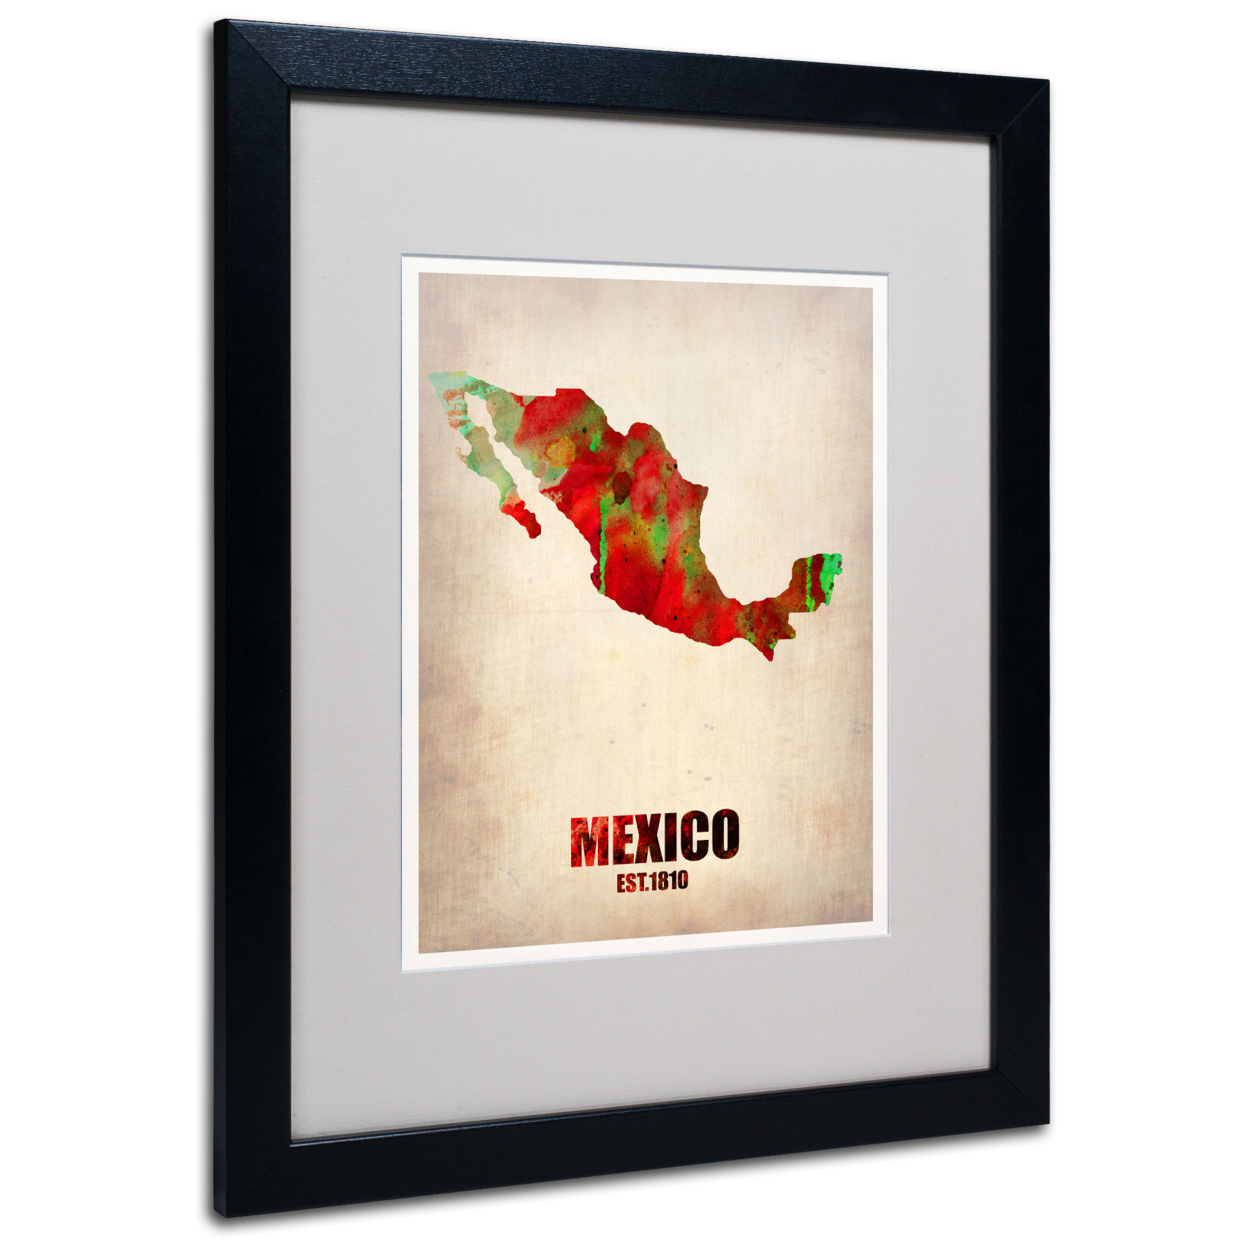 Naxart 'Mexico Watercolor Map' Black Wooden Framed Art 18 X 22 Inches